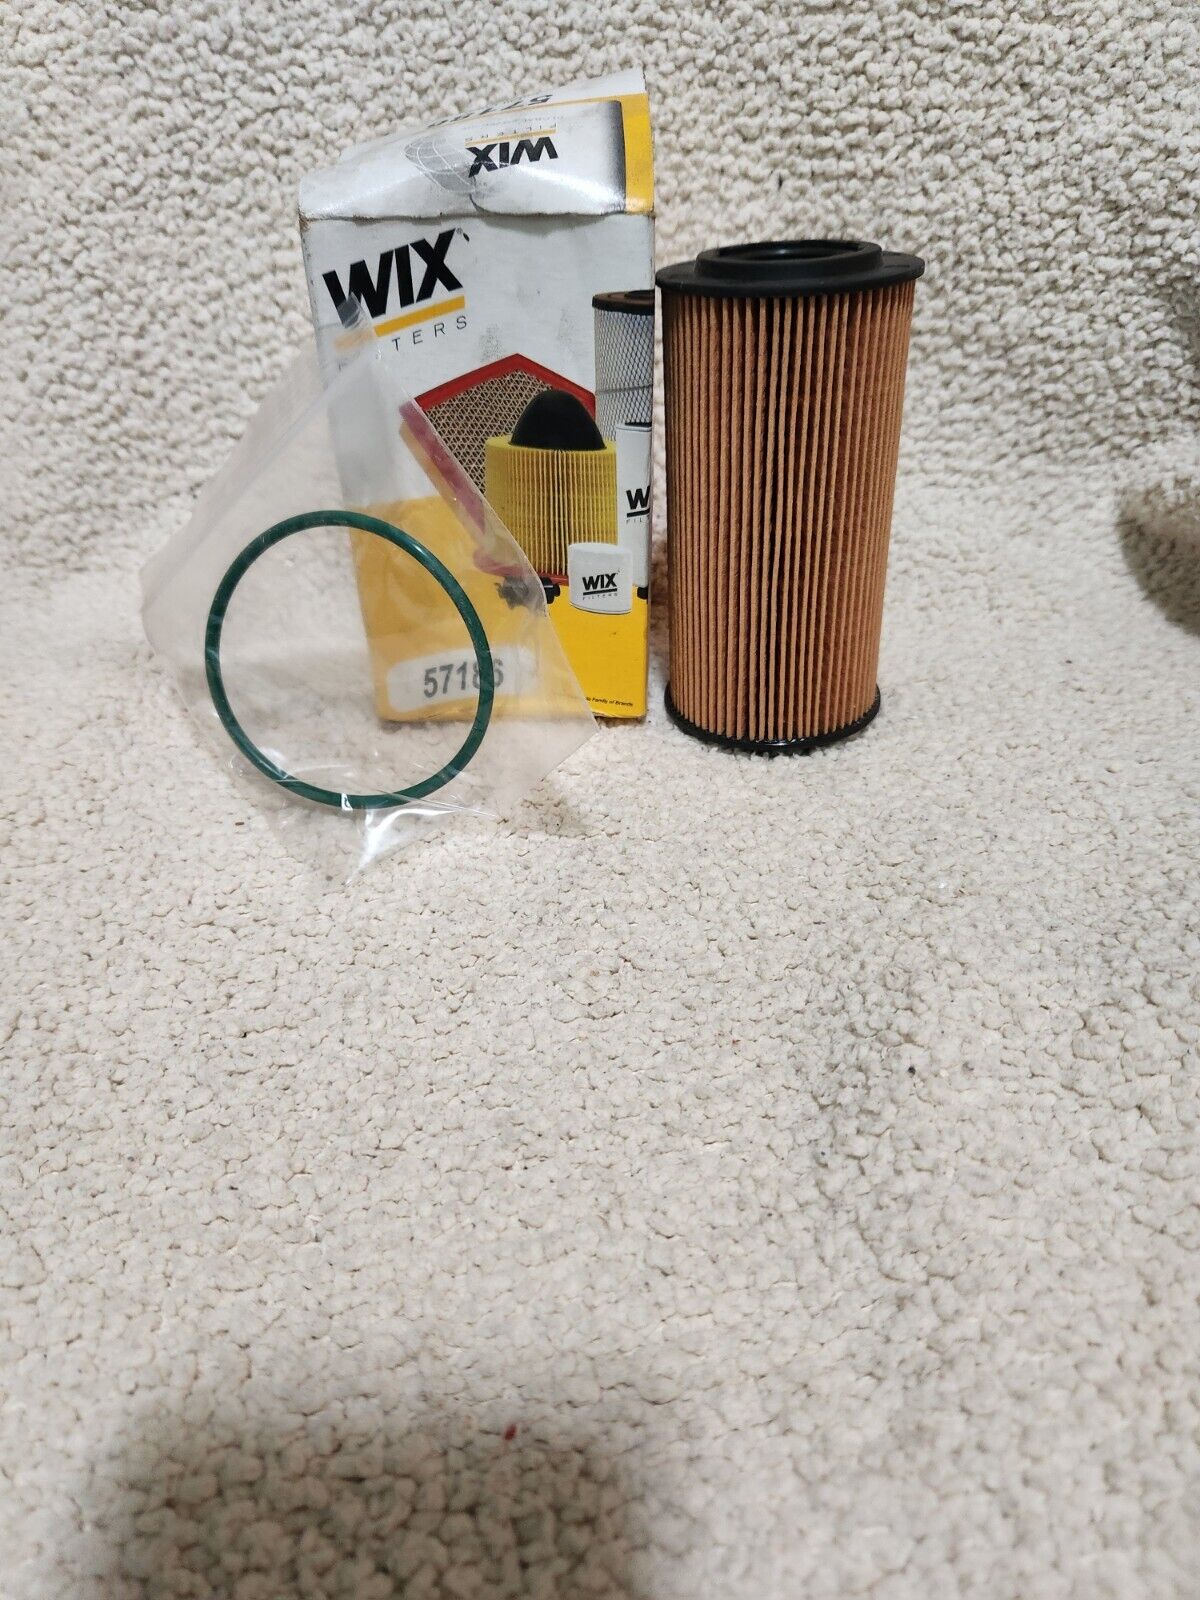 Wix 57186 Engine Oil Filter new open box